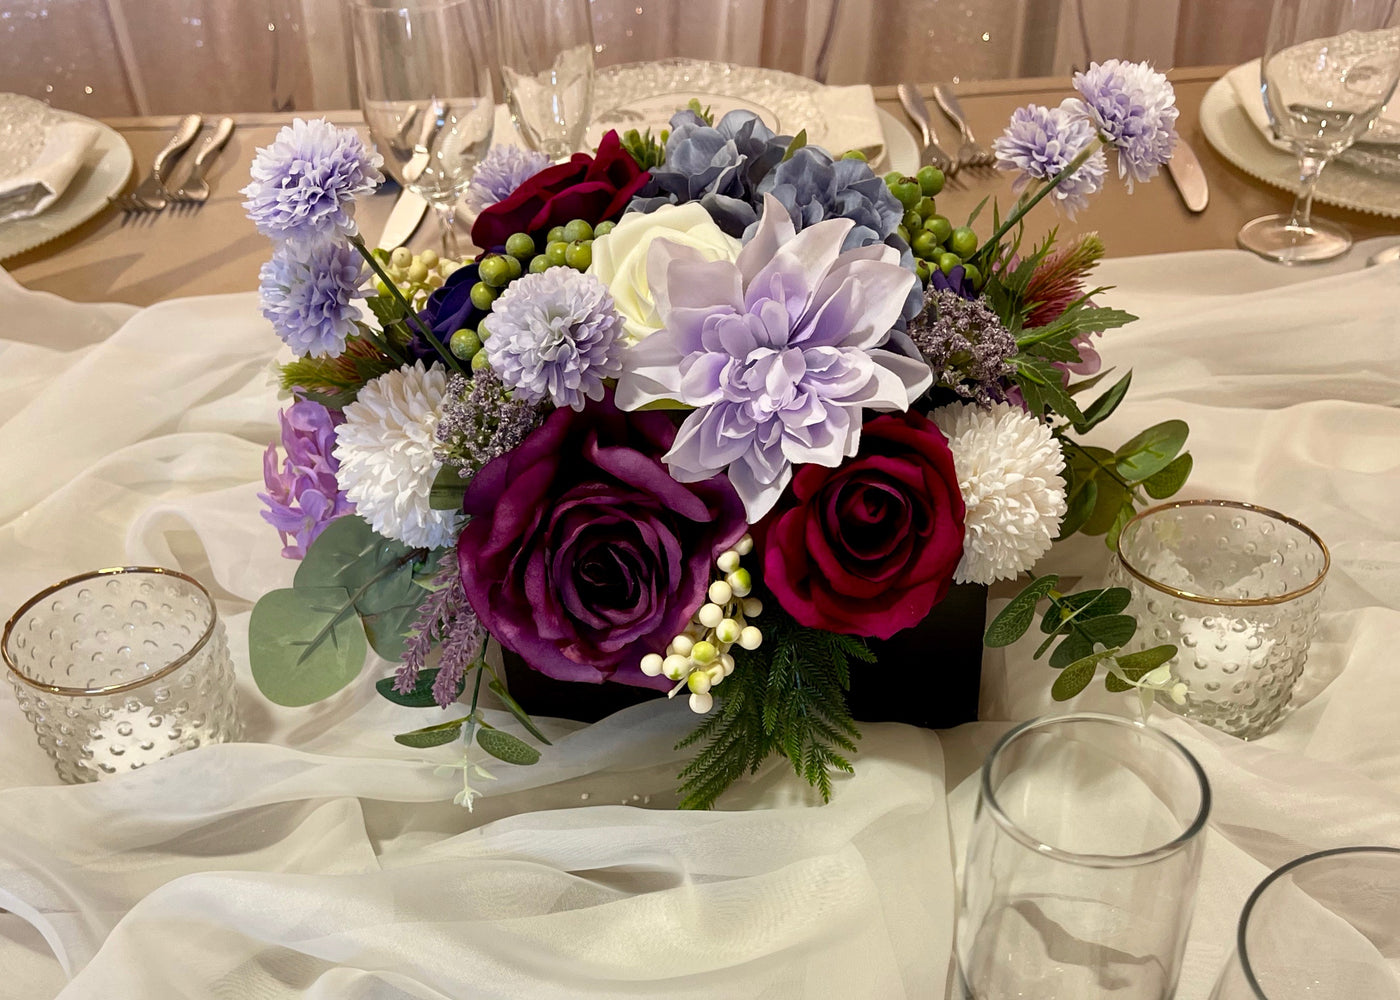 Rent a Rose- Centrepiece- Purple, Lavender, Fuchsia and white flowers-  Rent for five days for $54.00